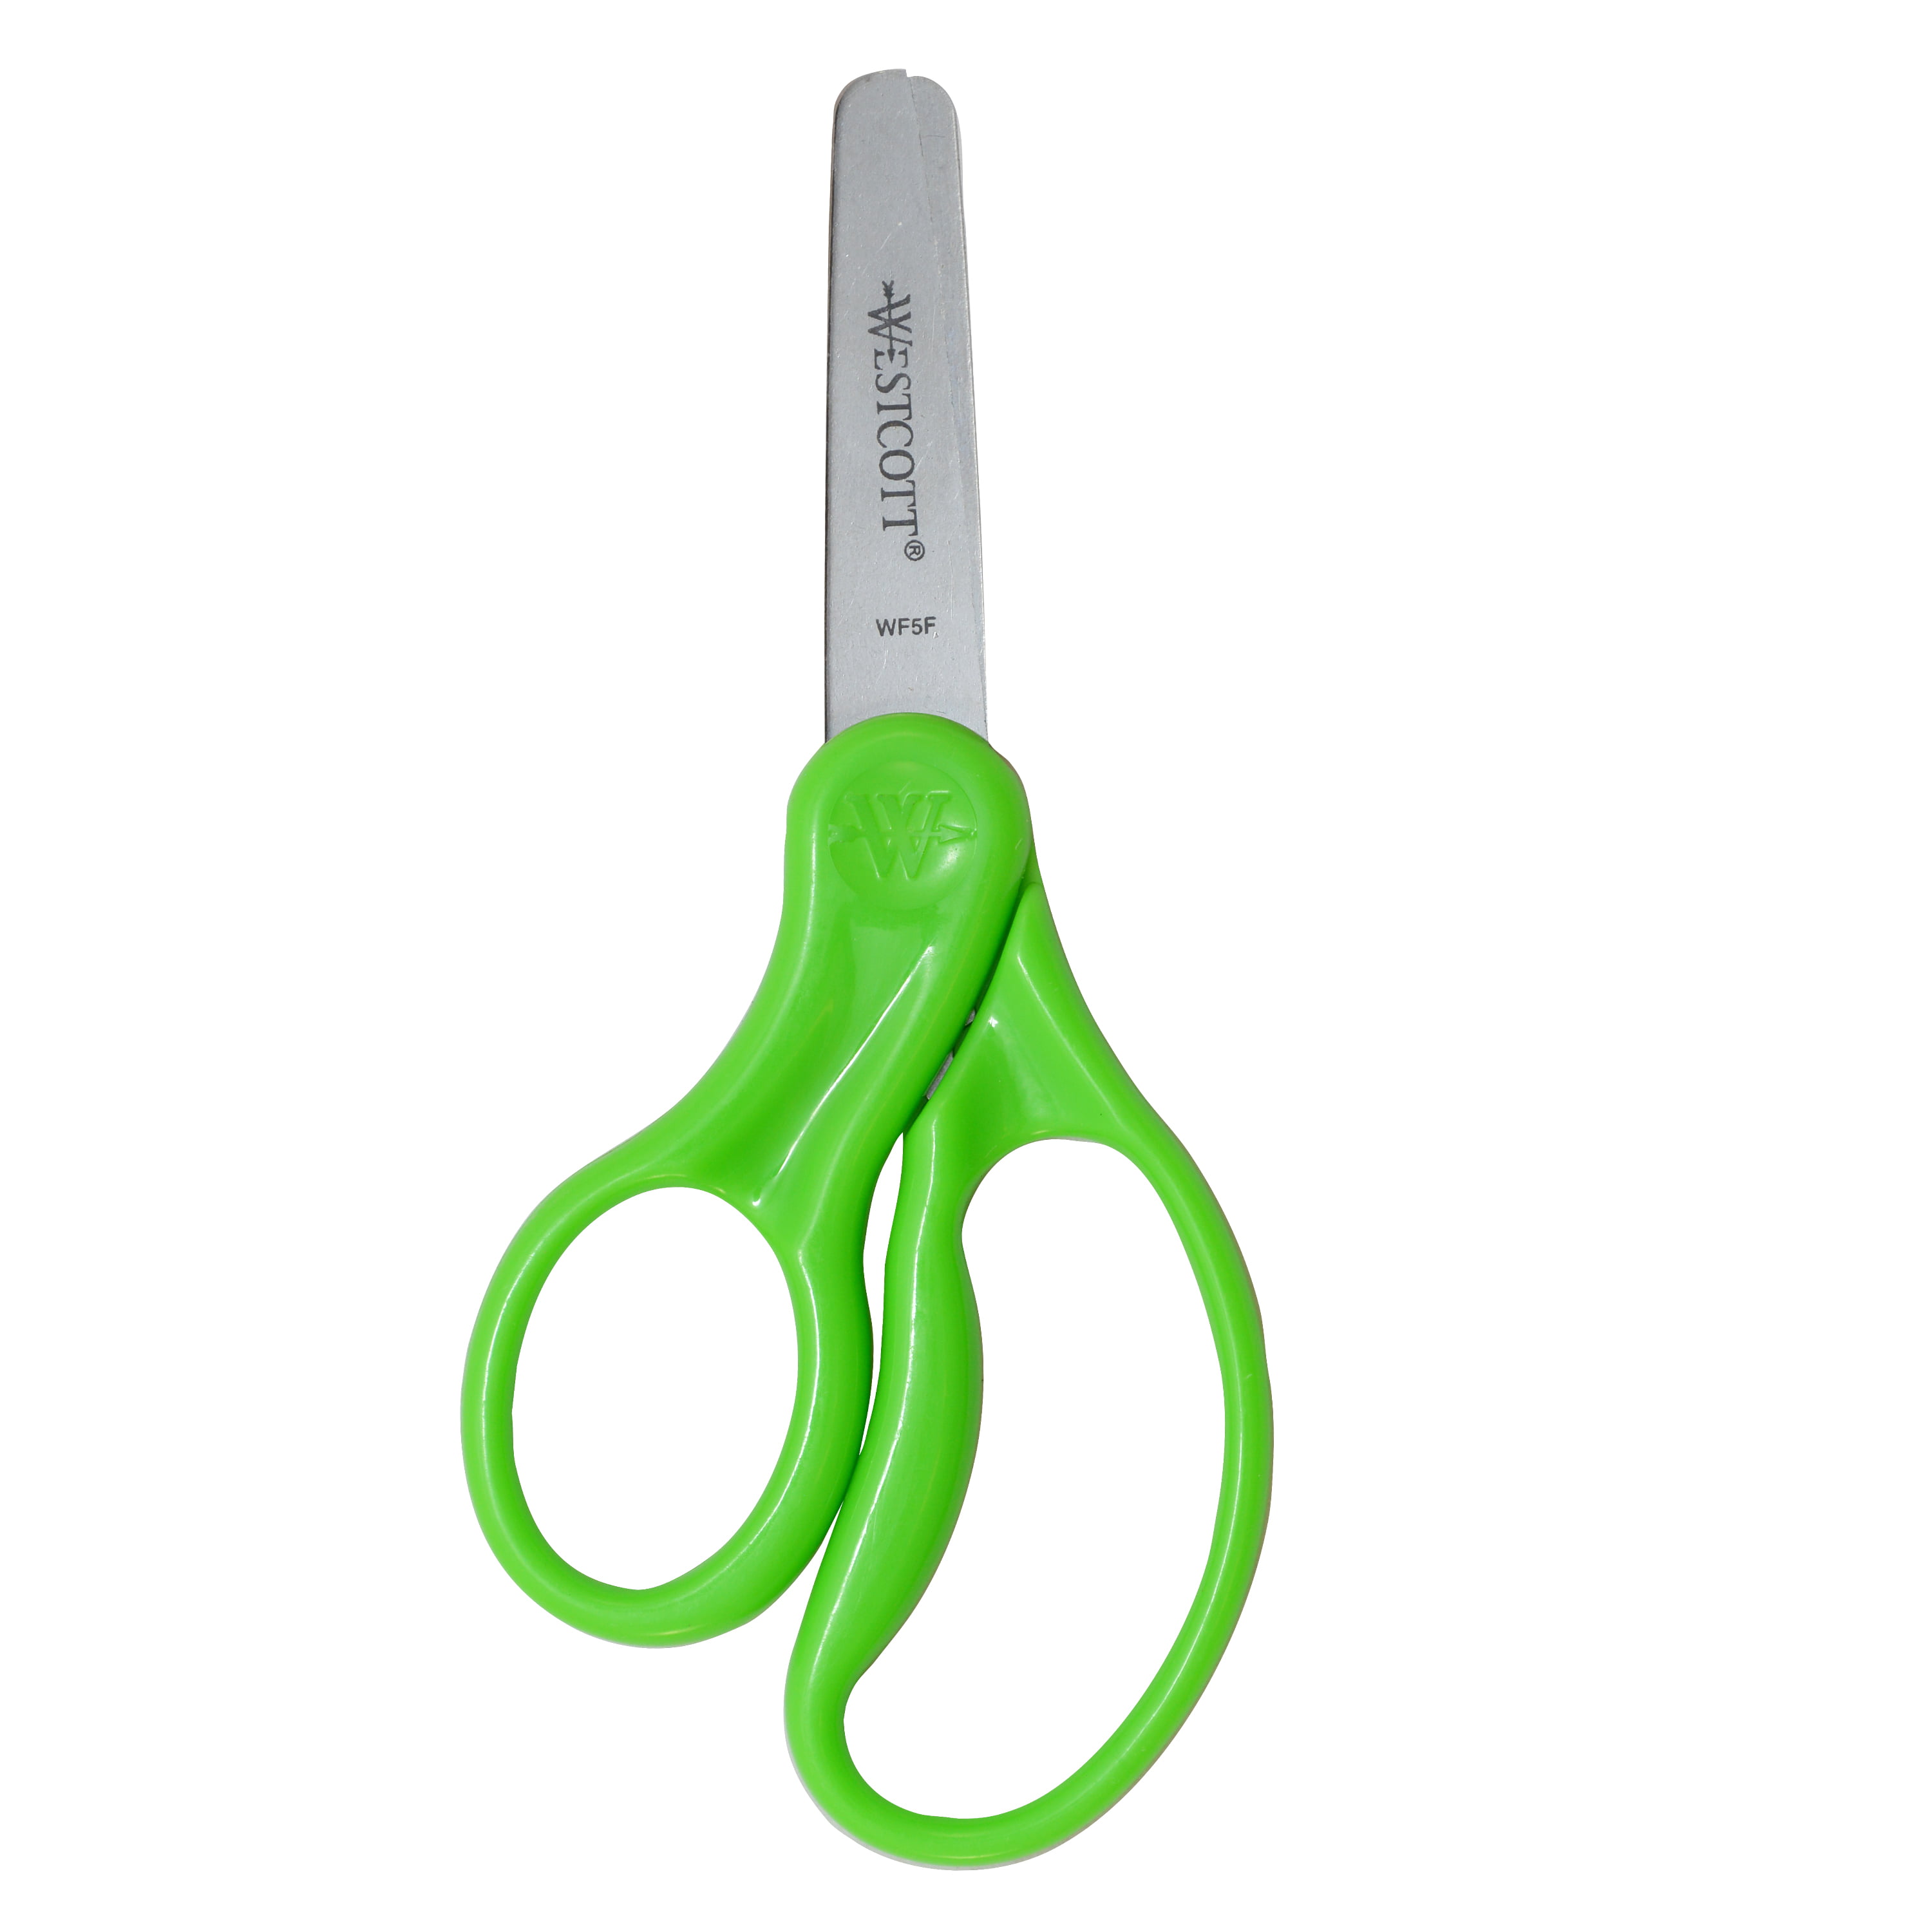 Adapted Scissors, 45 mm Round Blunt Tips, 45mm Round, Left-Handed